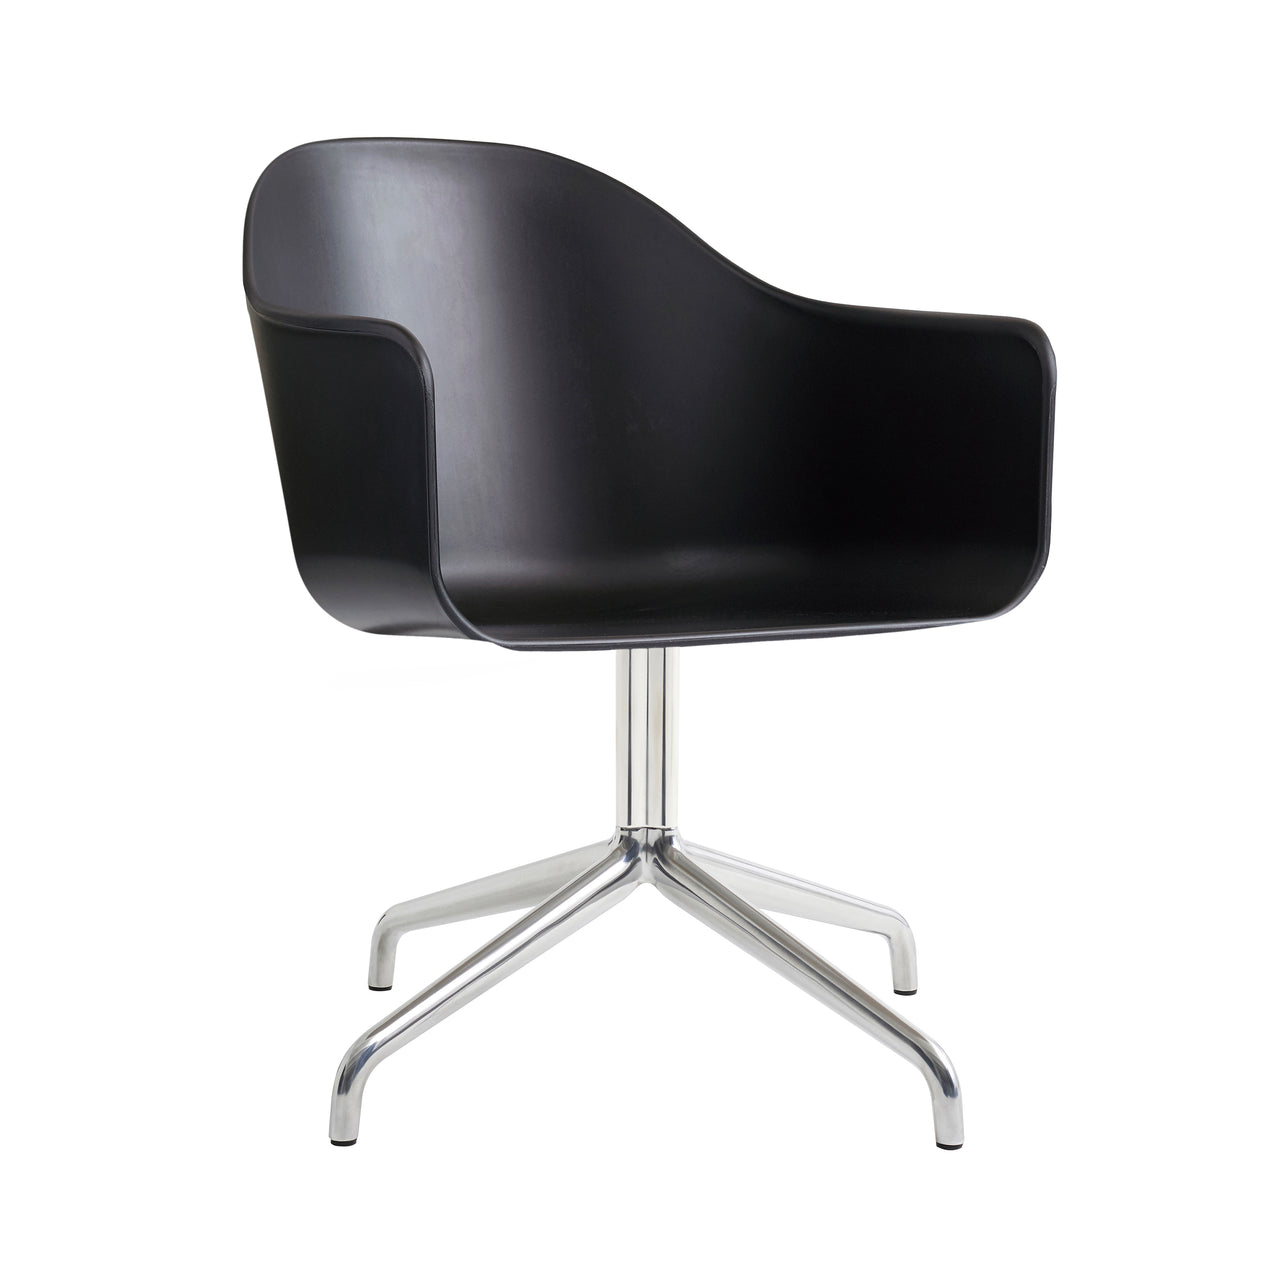 Harbour Dining Chair: Star Base + Polished Aluminum + Black